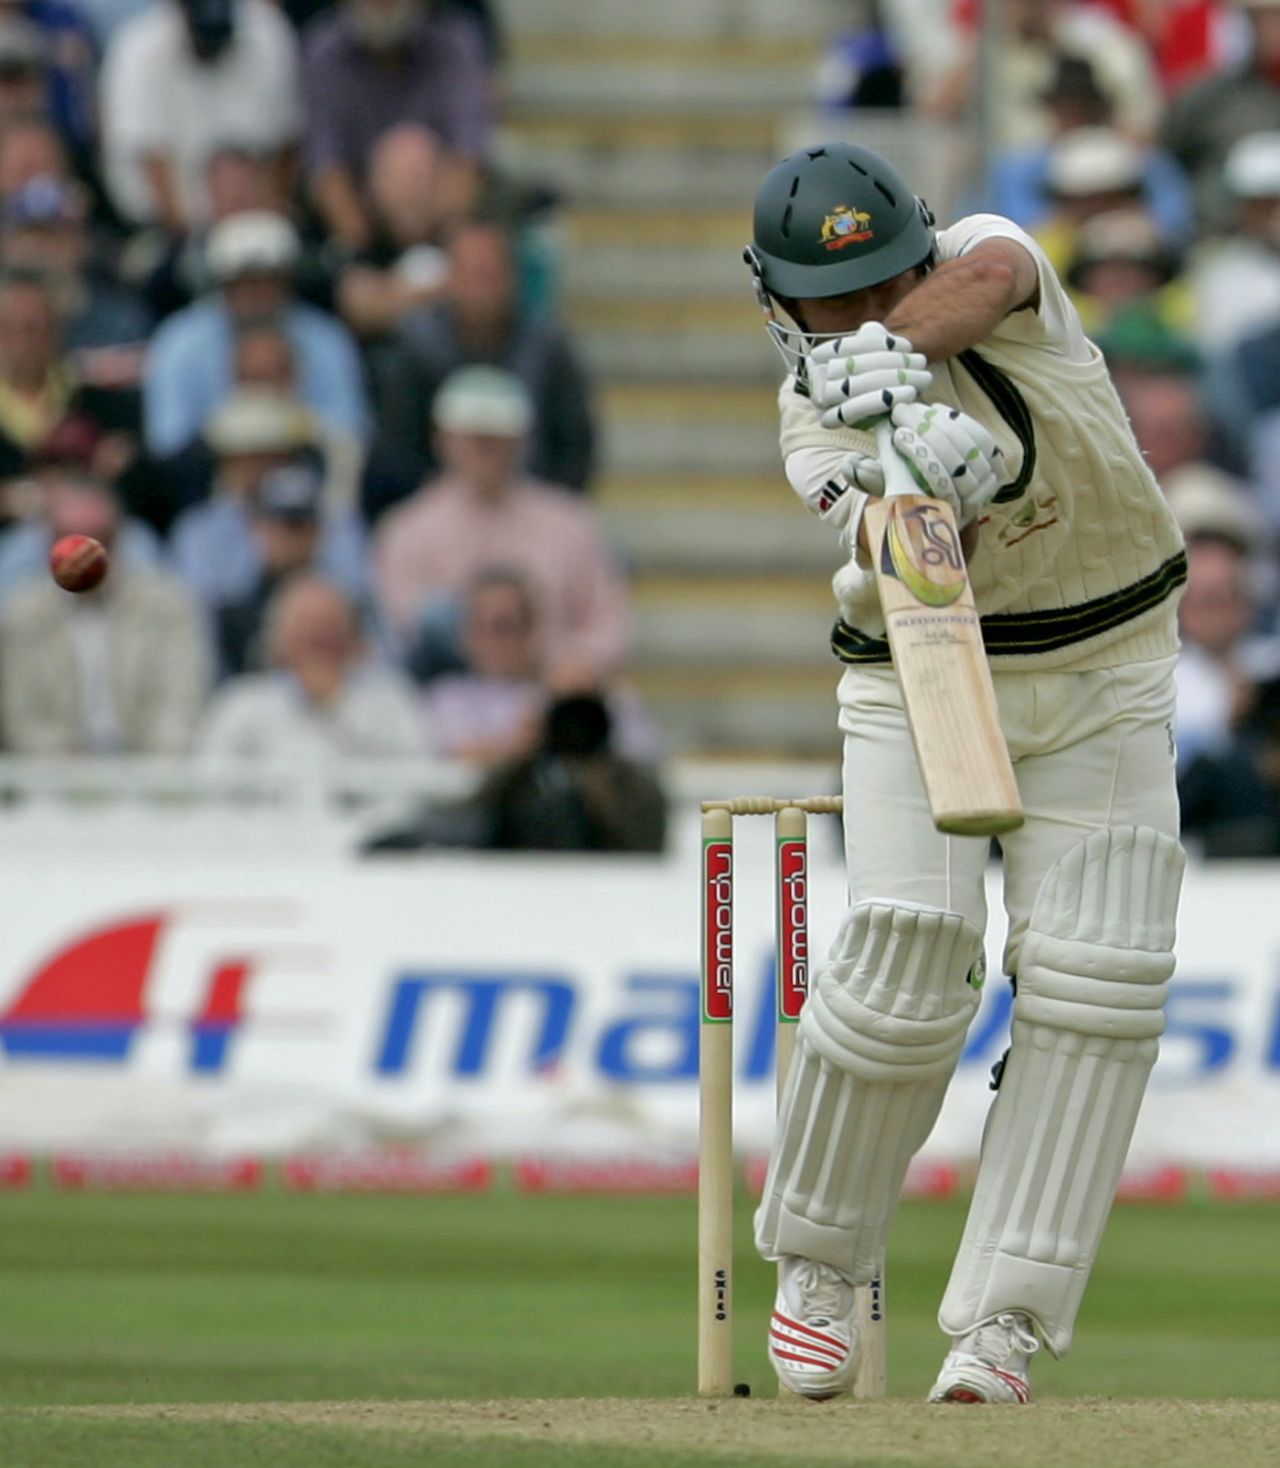 Ricky Ponting edges an Andrew Flintoff delivery to Geraint Jones, third day, second Test, England v Australia, Ashes 2005, Edgbaston, August 6, 2005